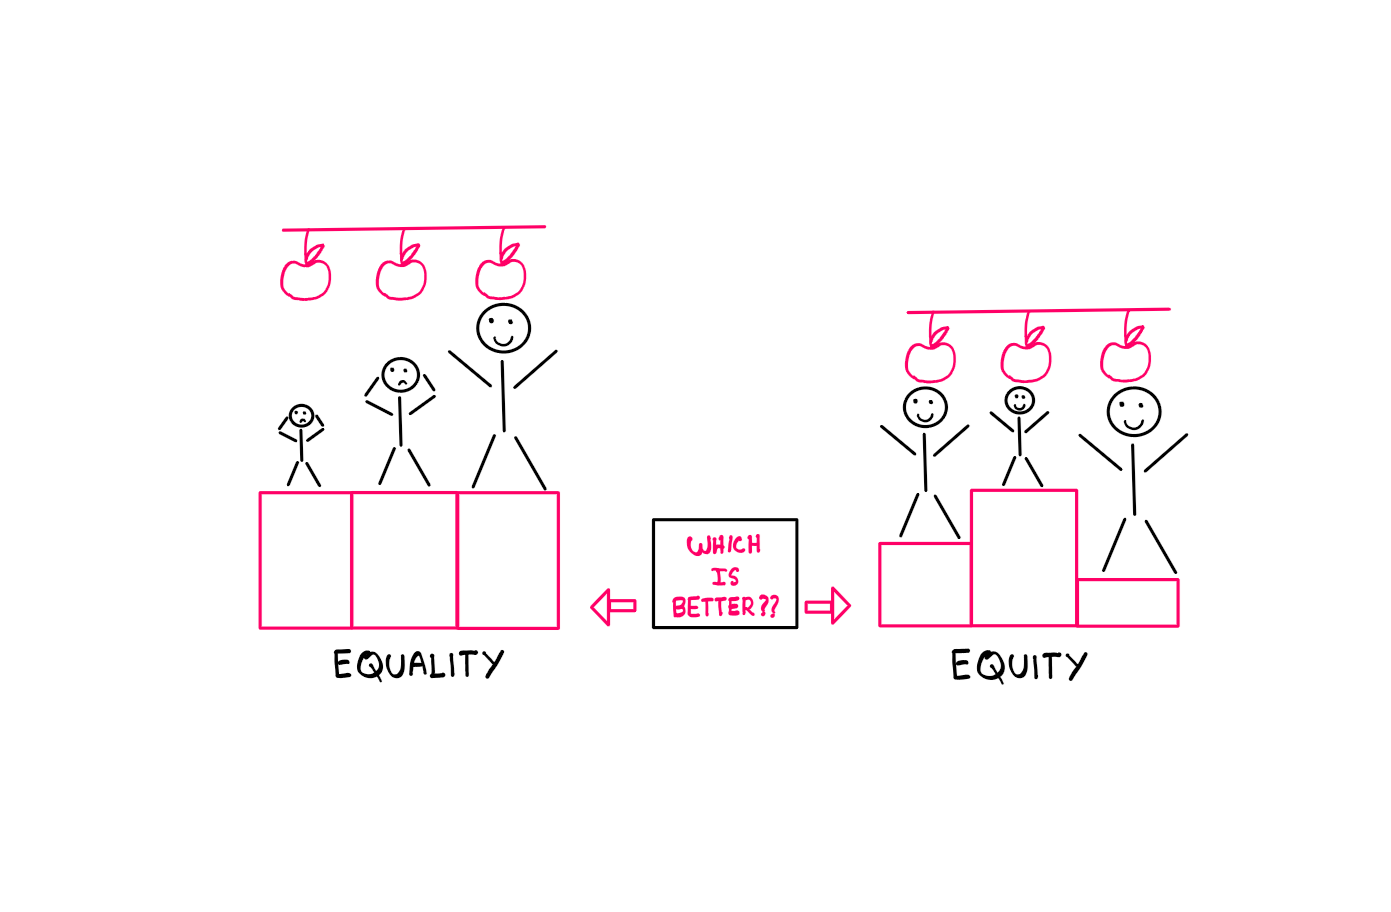 Equality Vs. Equity: How To Be Fair? - An illustration showing three stick figures of different sizes standing on platforms of equal heights on the left. The biggest stick figure is able to reach the apple above. But the other two cannot reach the apples at the same height. This is an example of equality. On the right, the same stick figures are placed on platforms of different sizes such that they are all able to reach their respective apples. This is an example of equity.